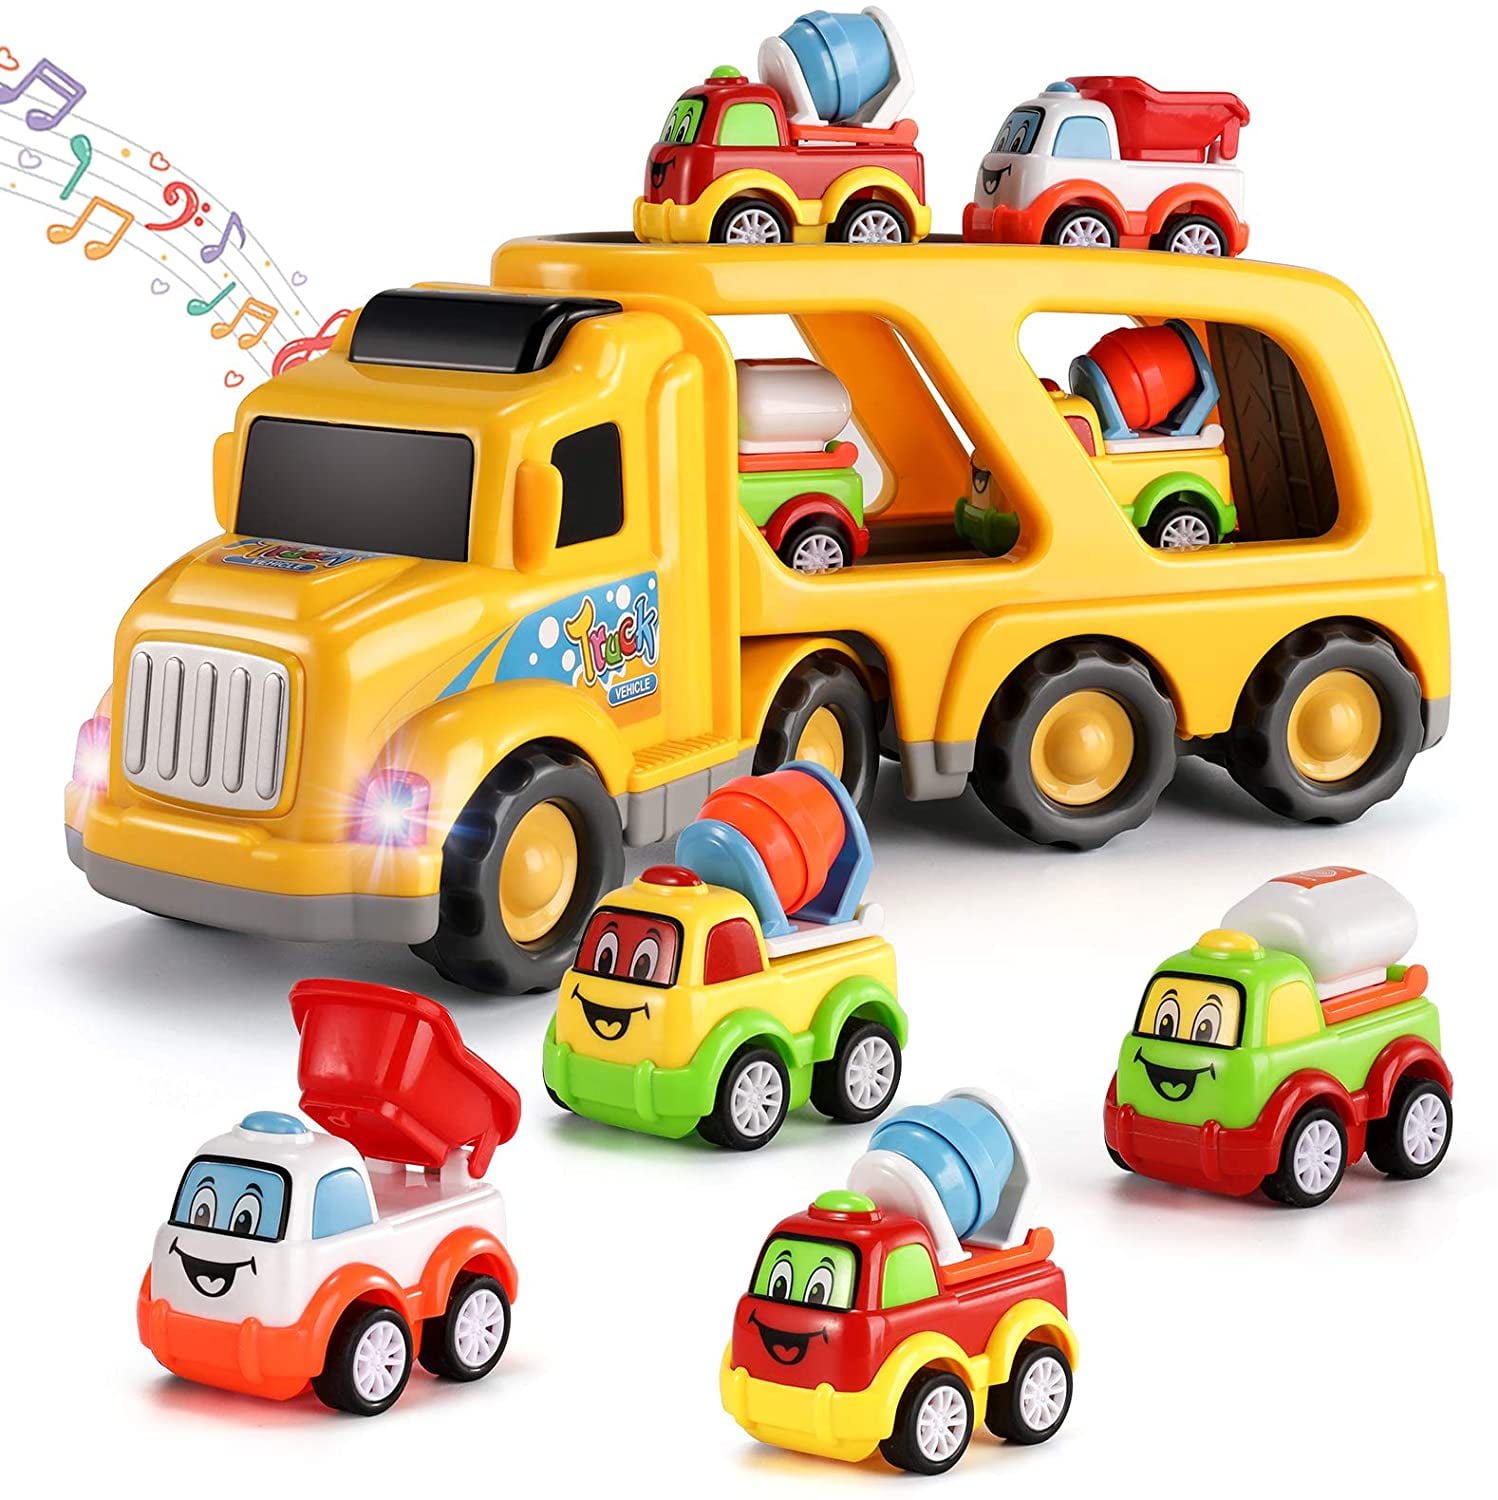 Water Vehicle Contain 1 Large Transport Cargo Truck Cement Mixer 5-in-1 Friction Power Car Toys for 3 4 5 6 Years Old Boys and Girls Loading car Construction Truck Toys Set with Sound and Light